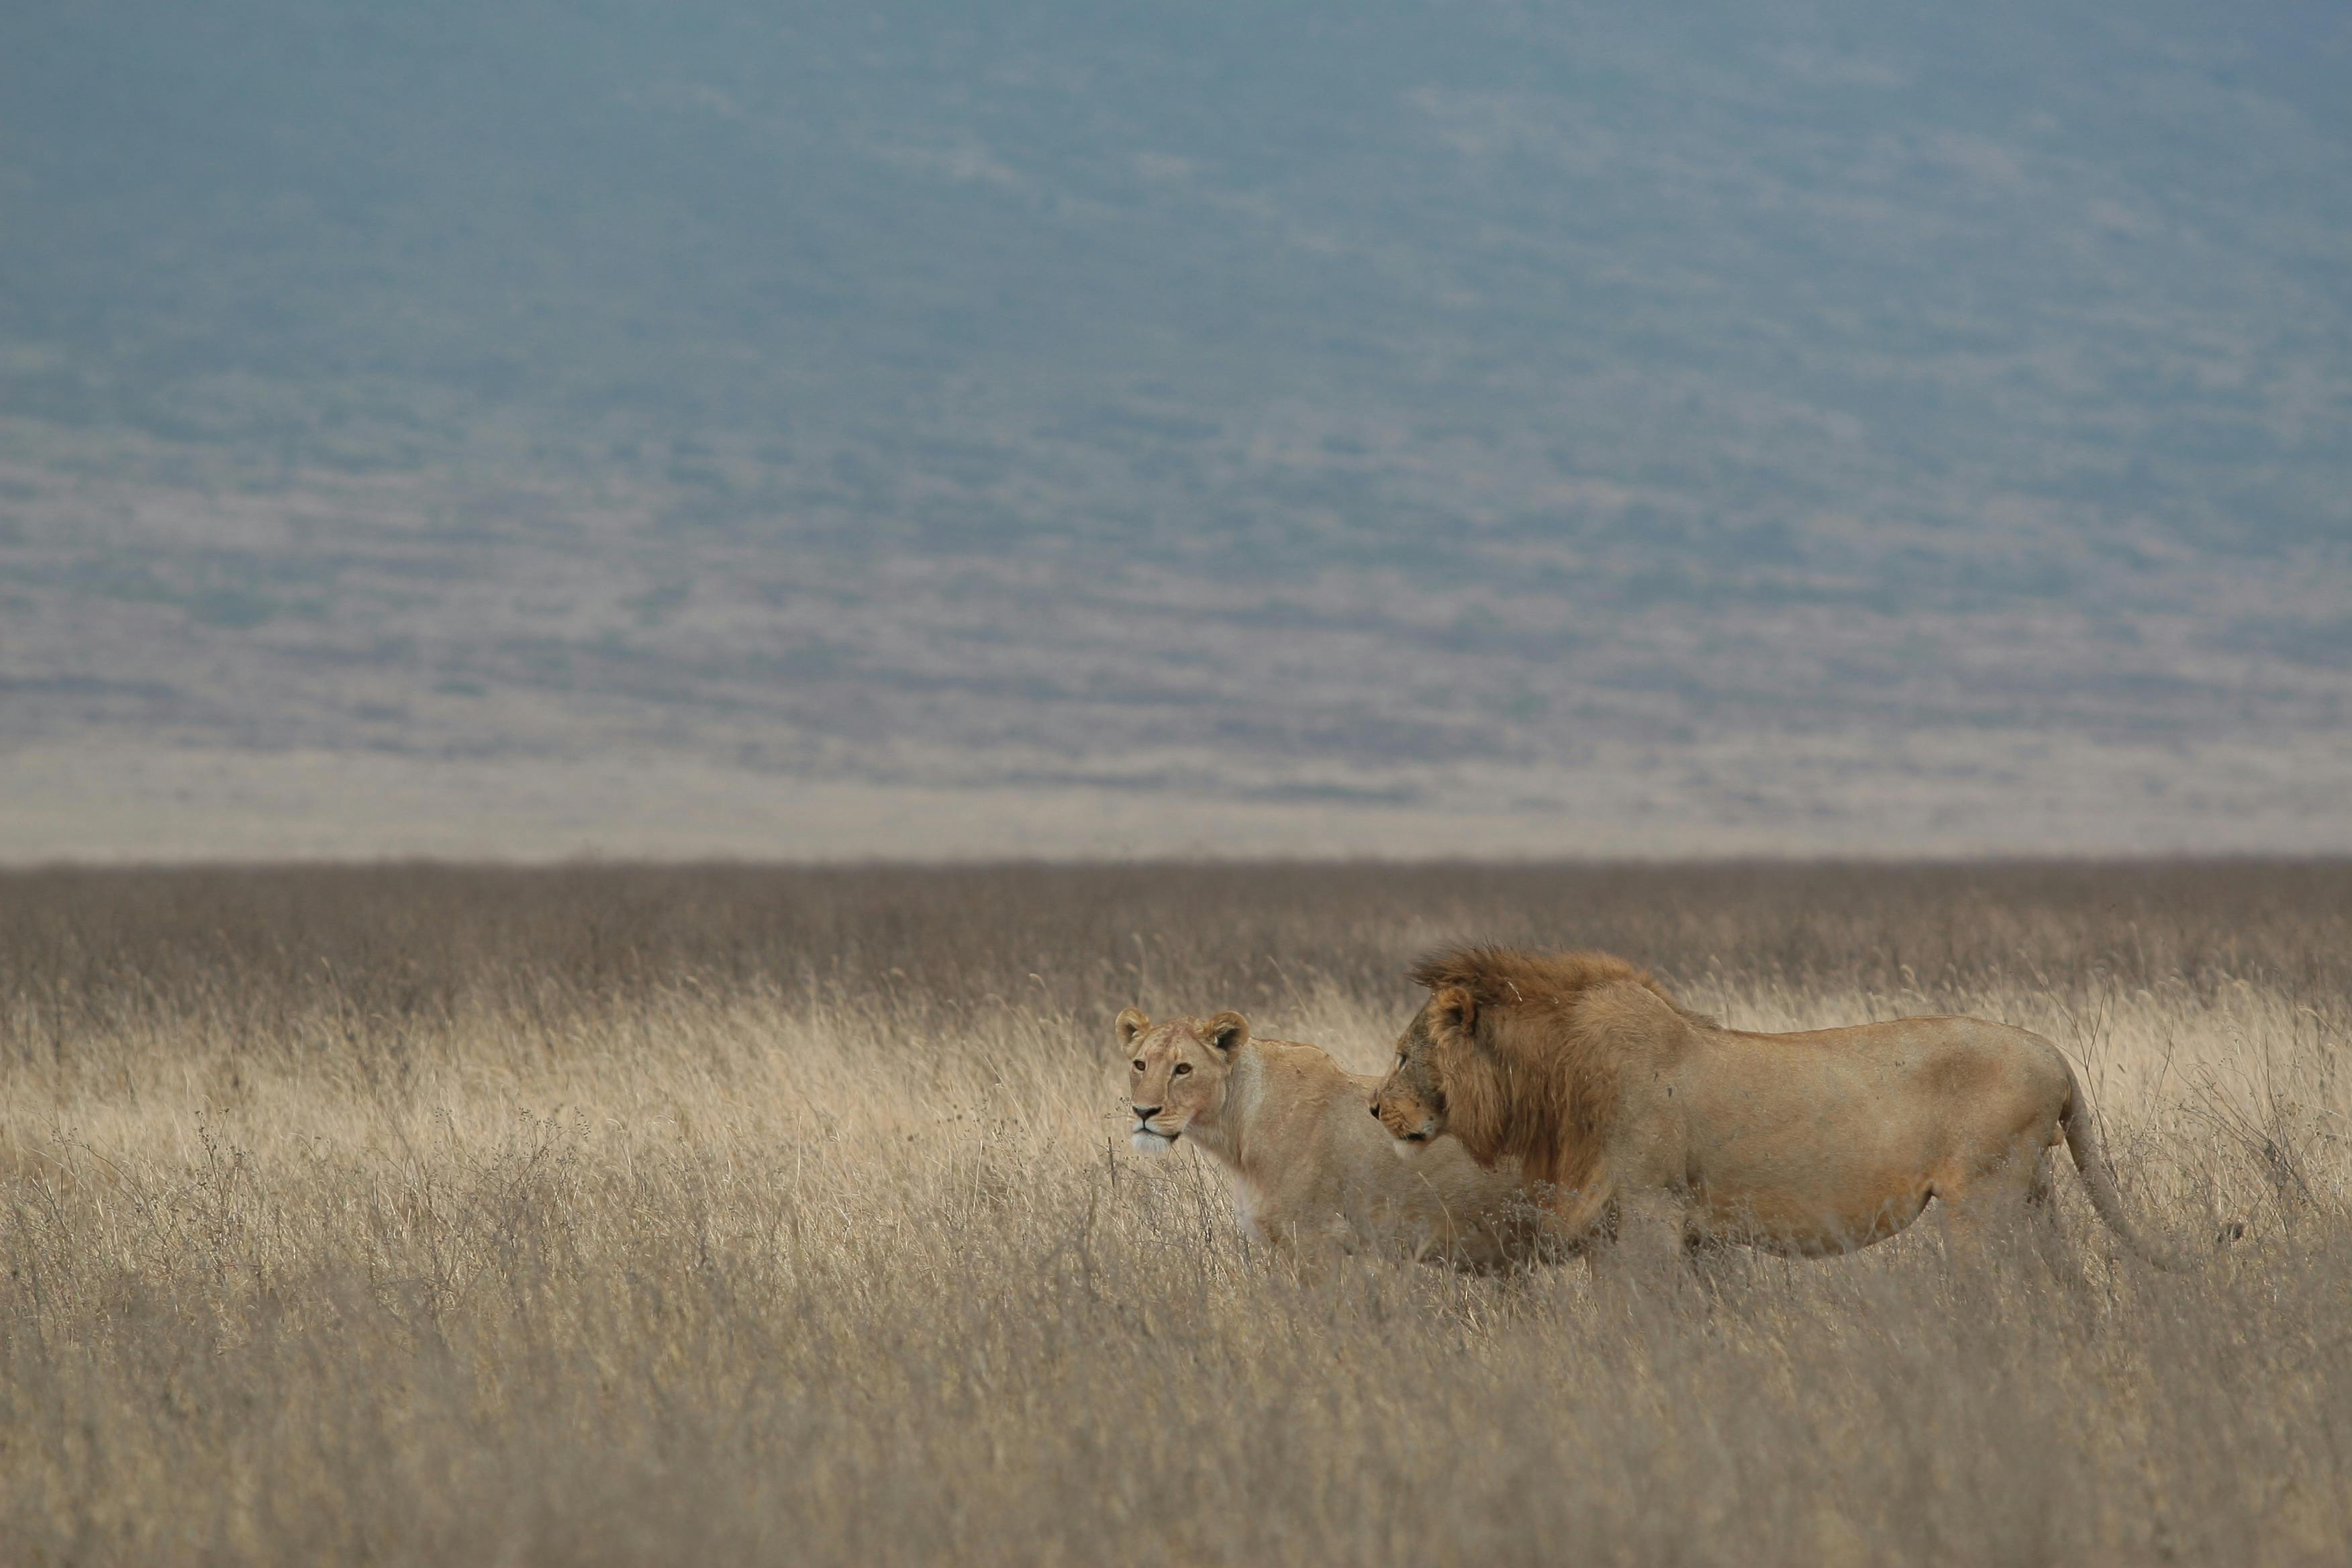 Incentive payments to encourage human-lion coexistence